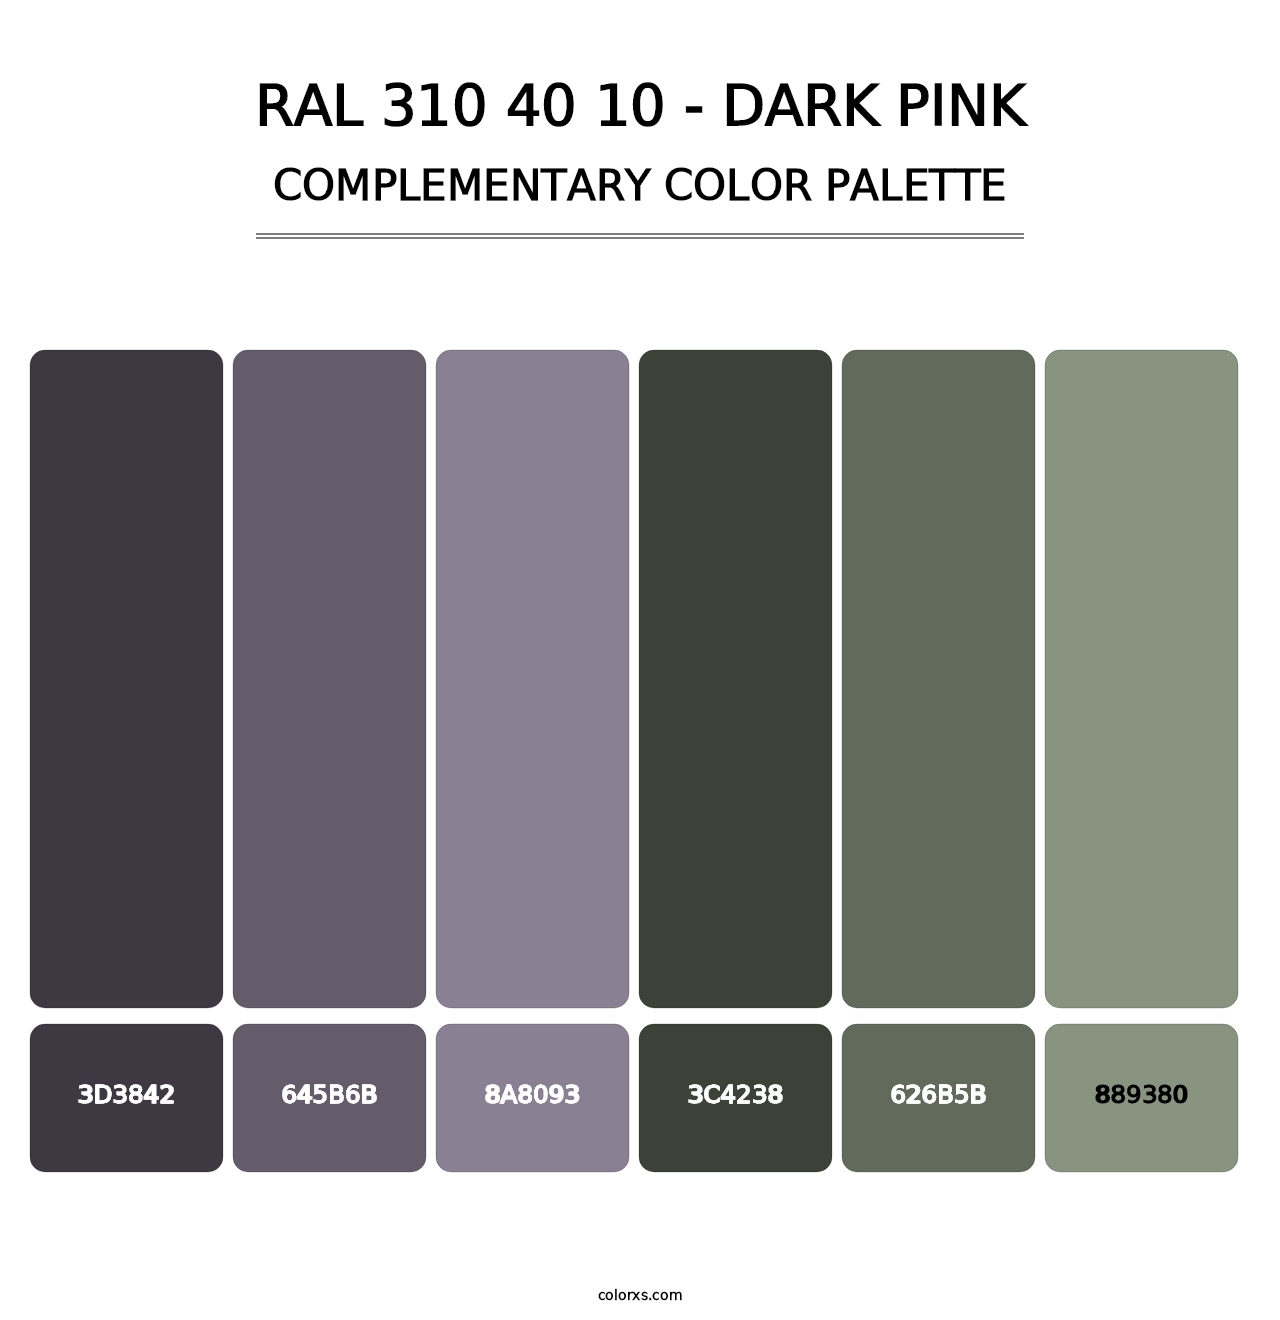 RAL 310 40 10 - Dark Pink - Complementary Color Palette